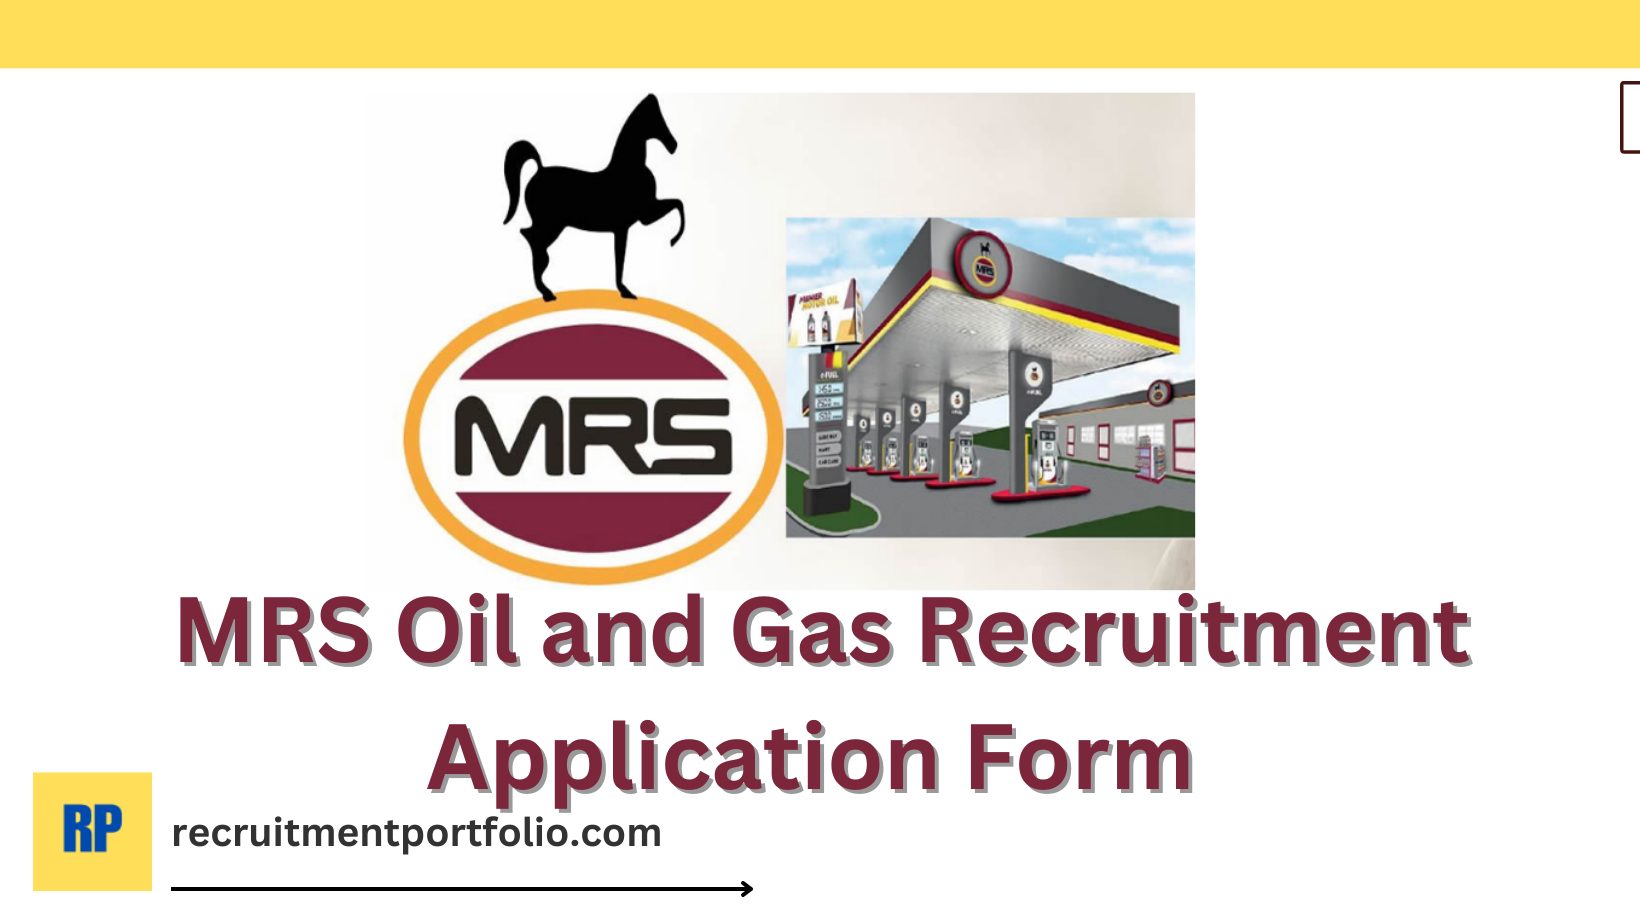 MRS Oil and Gas Recruitment